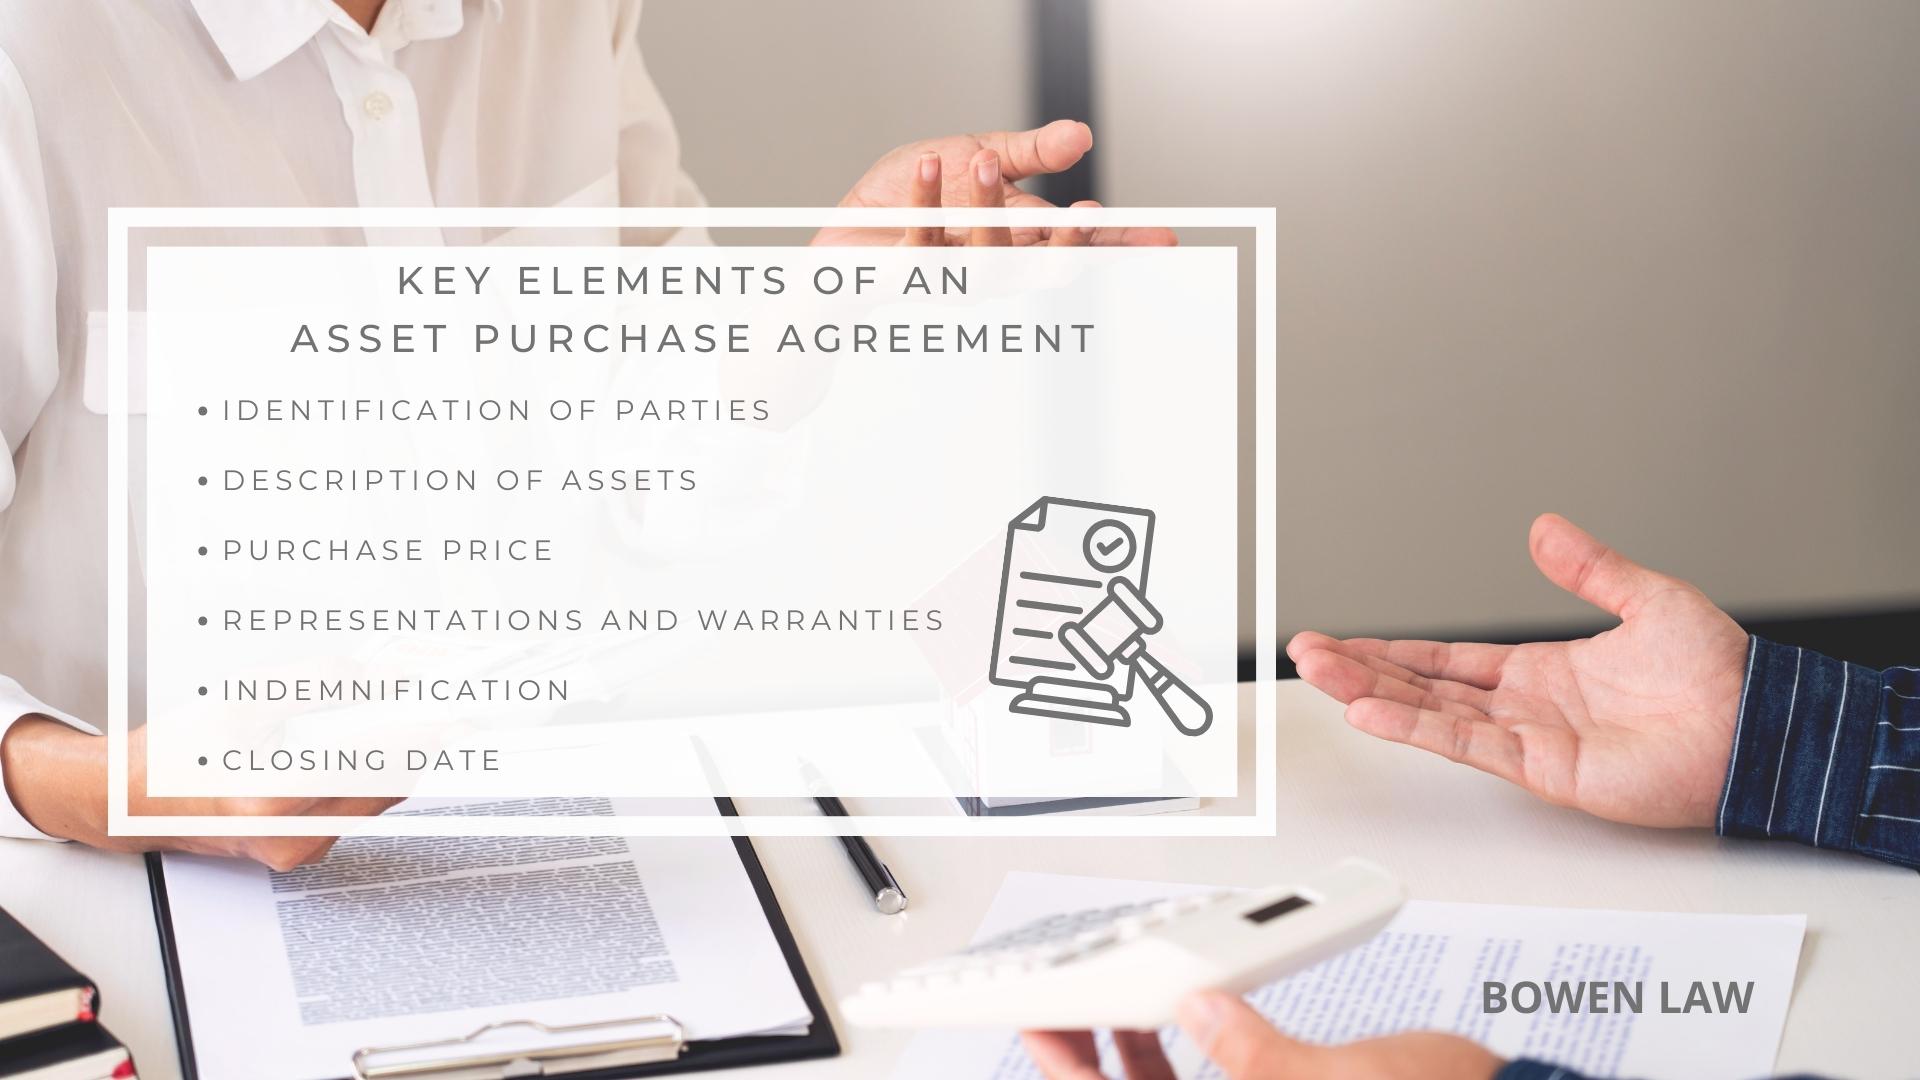 Infographic image of key elements of an asset purchase agreement